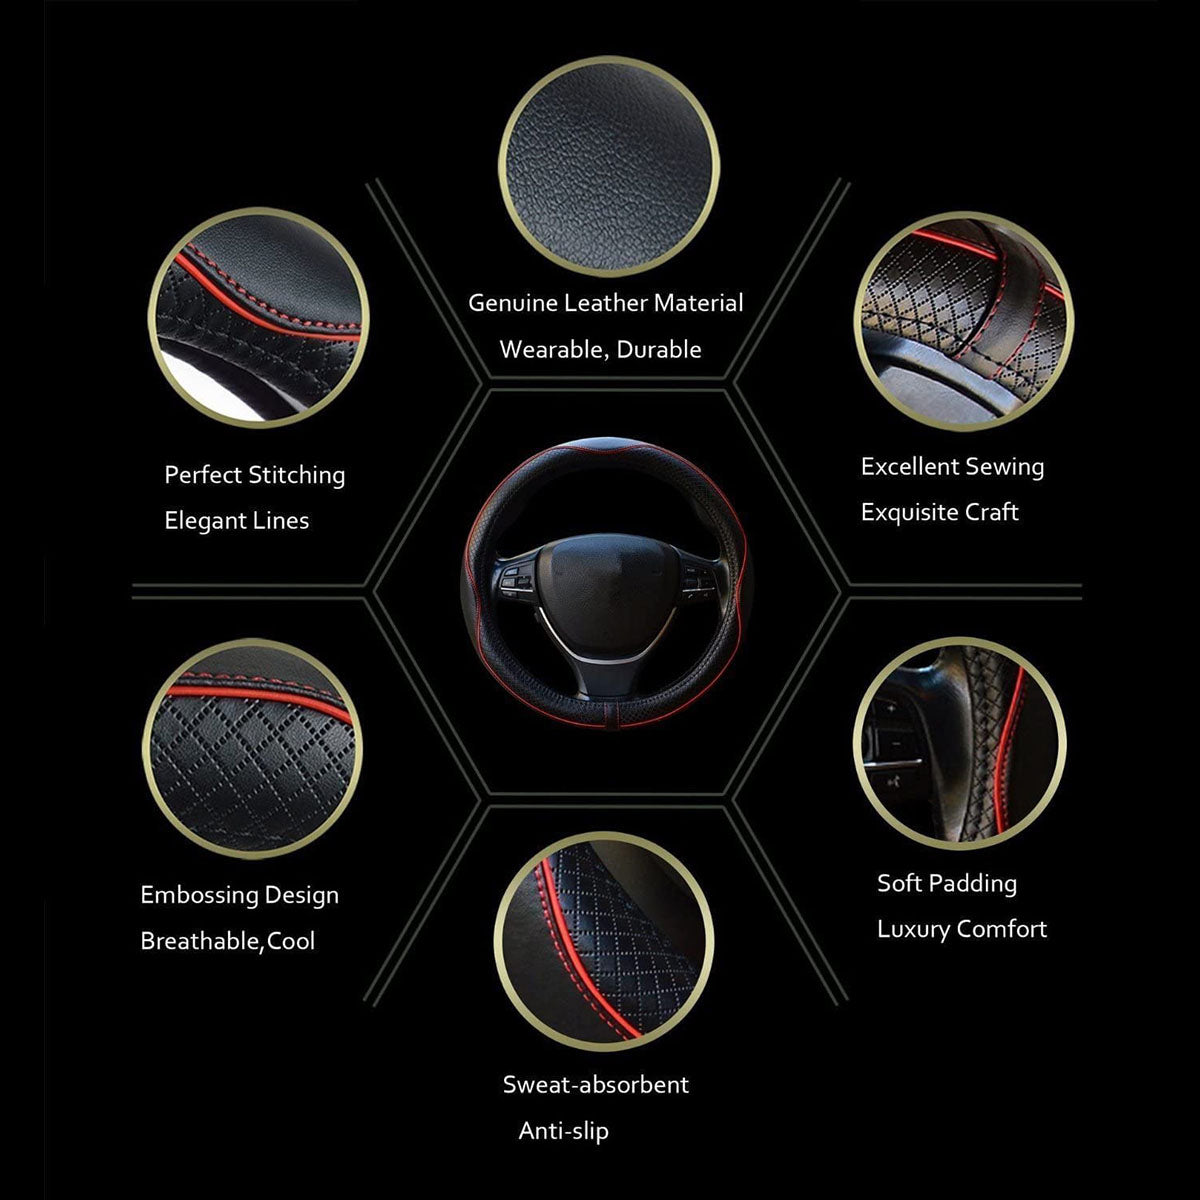 Car Steering Wheel Cover, Custom For Your Cars, Anti-Slip, Safety, Soft, Breathable, Heavy Duty, Thick, Full Surround, Sports Style, Car Accessories LR18990